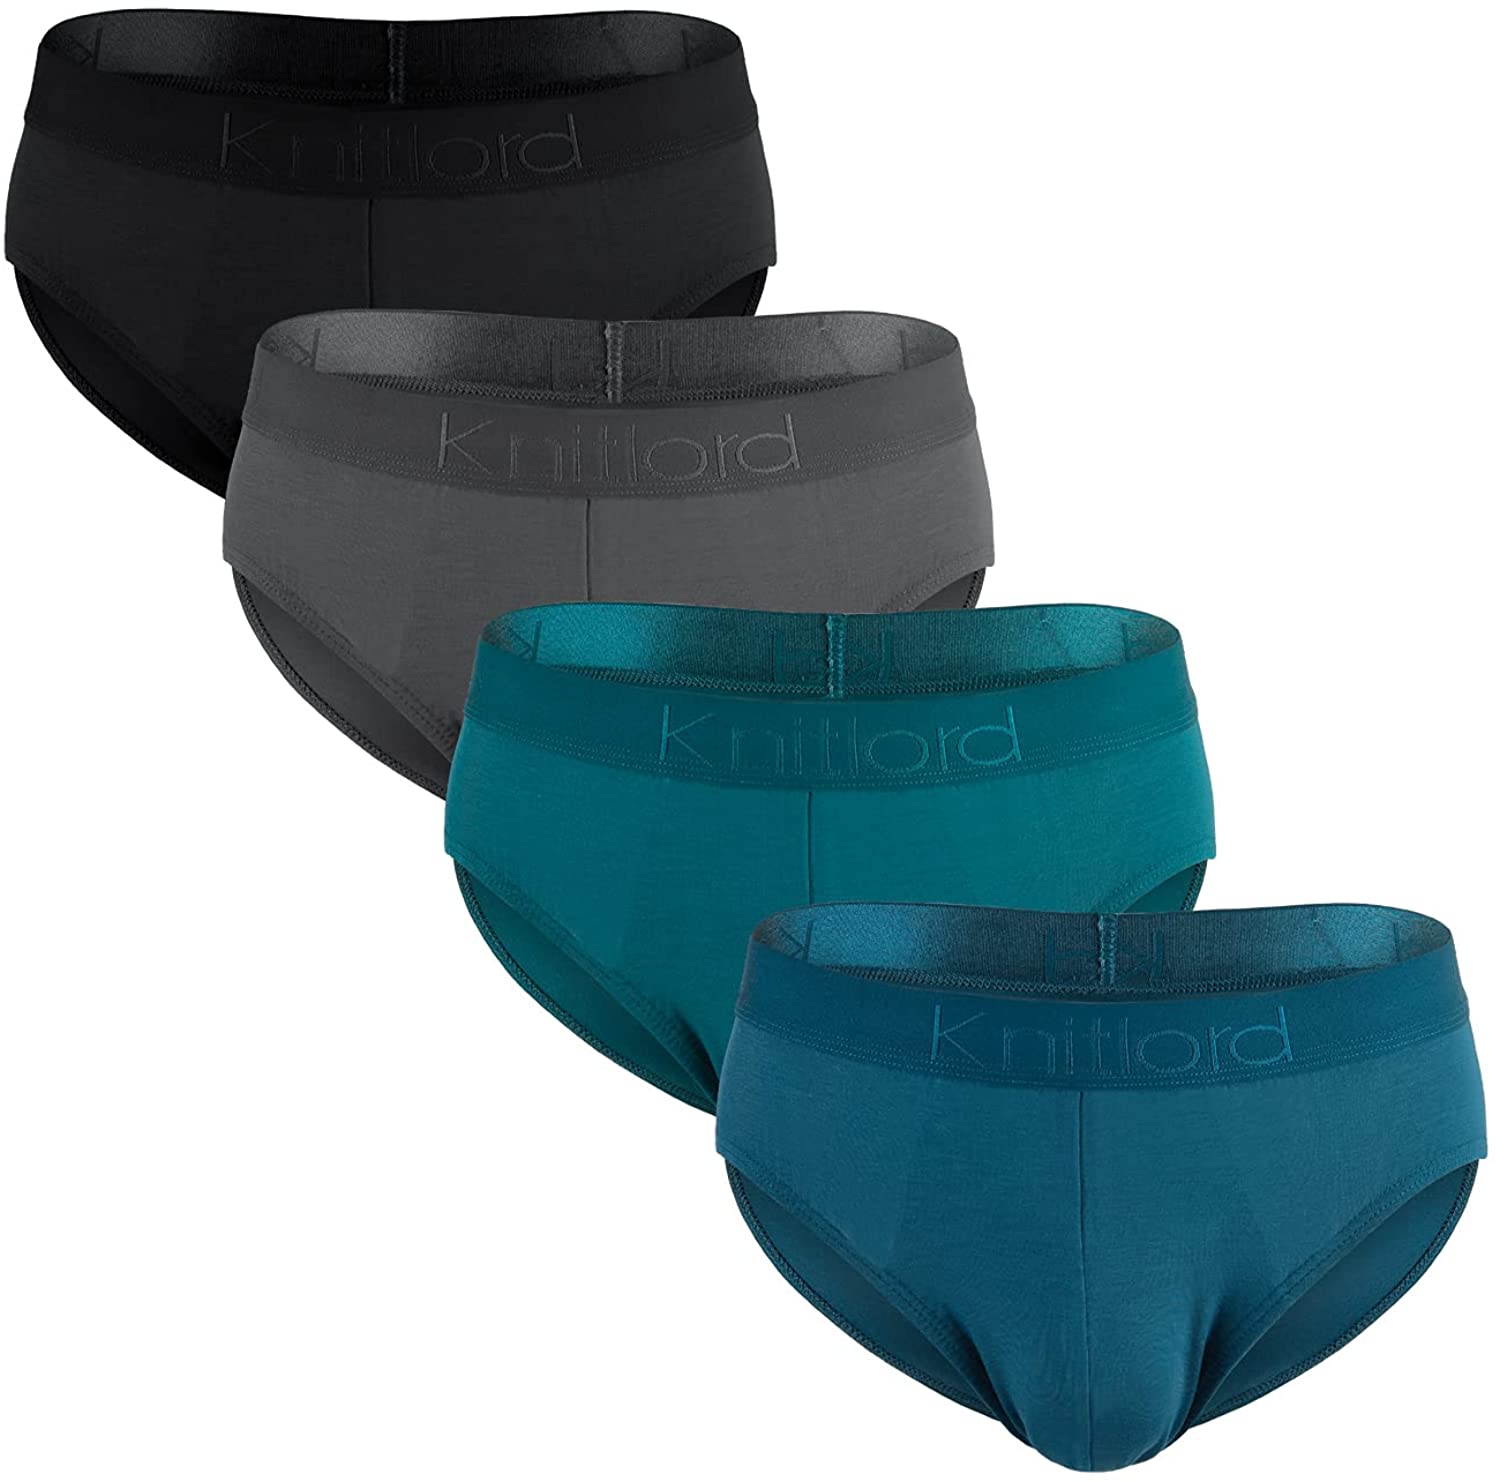 KNITLORD Men's Bamboo Underwear Soft Lightweight Mid/Low Rise Briefs 3 or 4  Pack